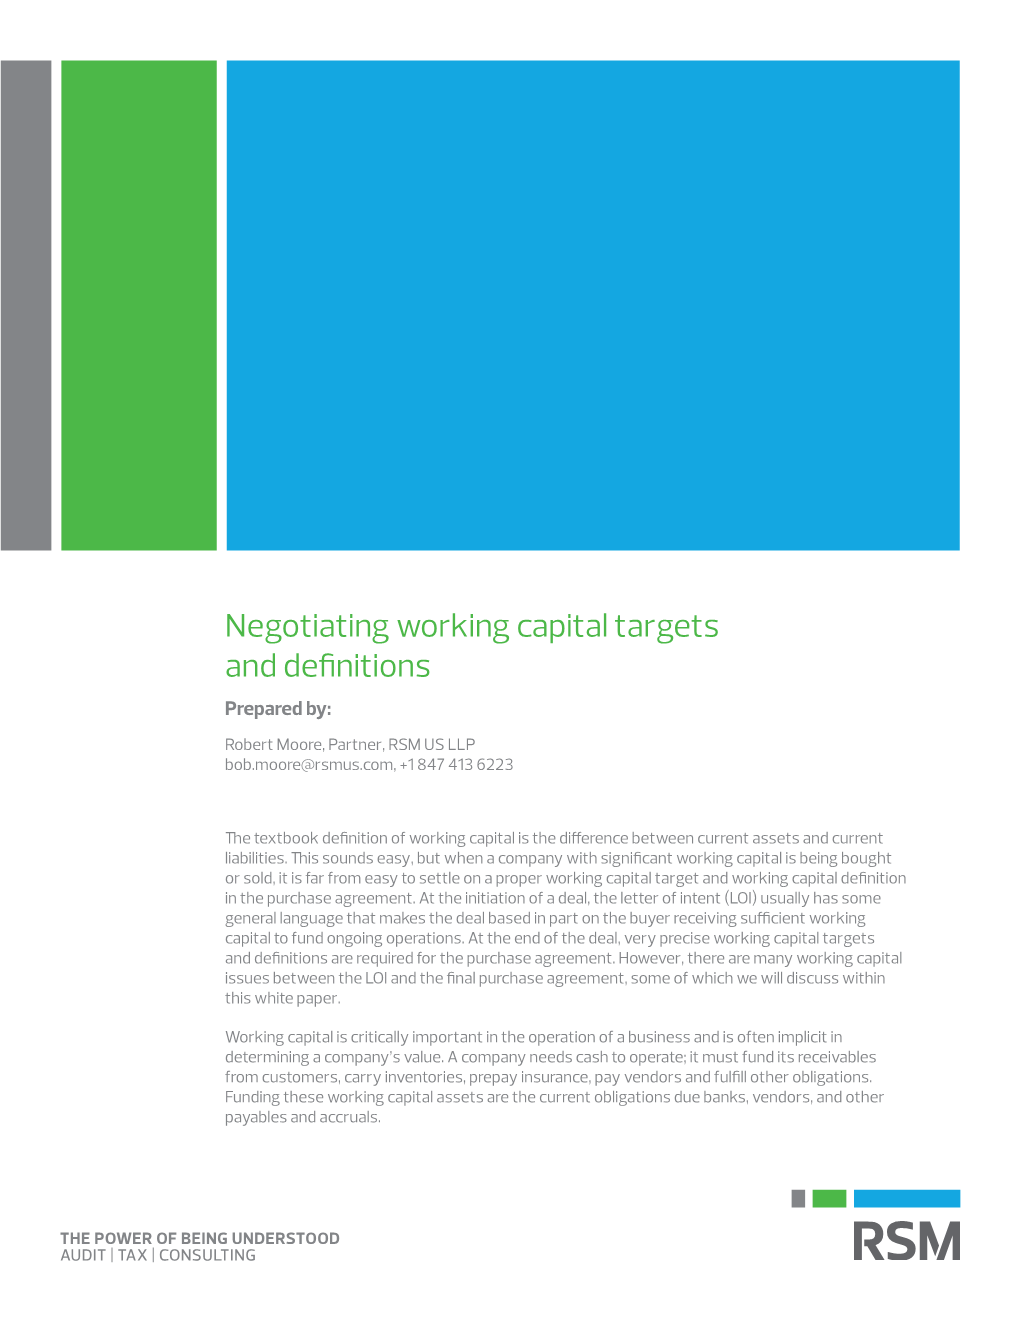 Negotiating Working Capital Targets and Definitions Prepared By